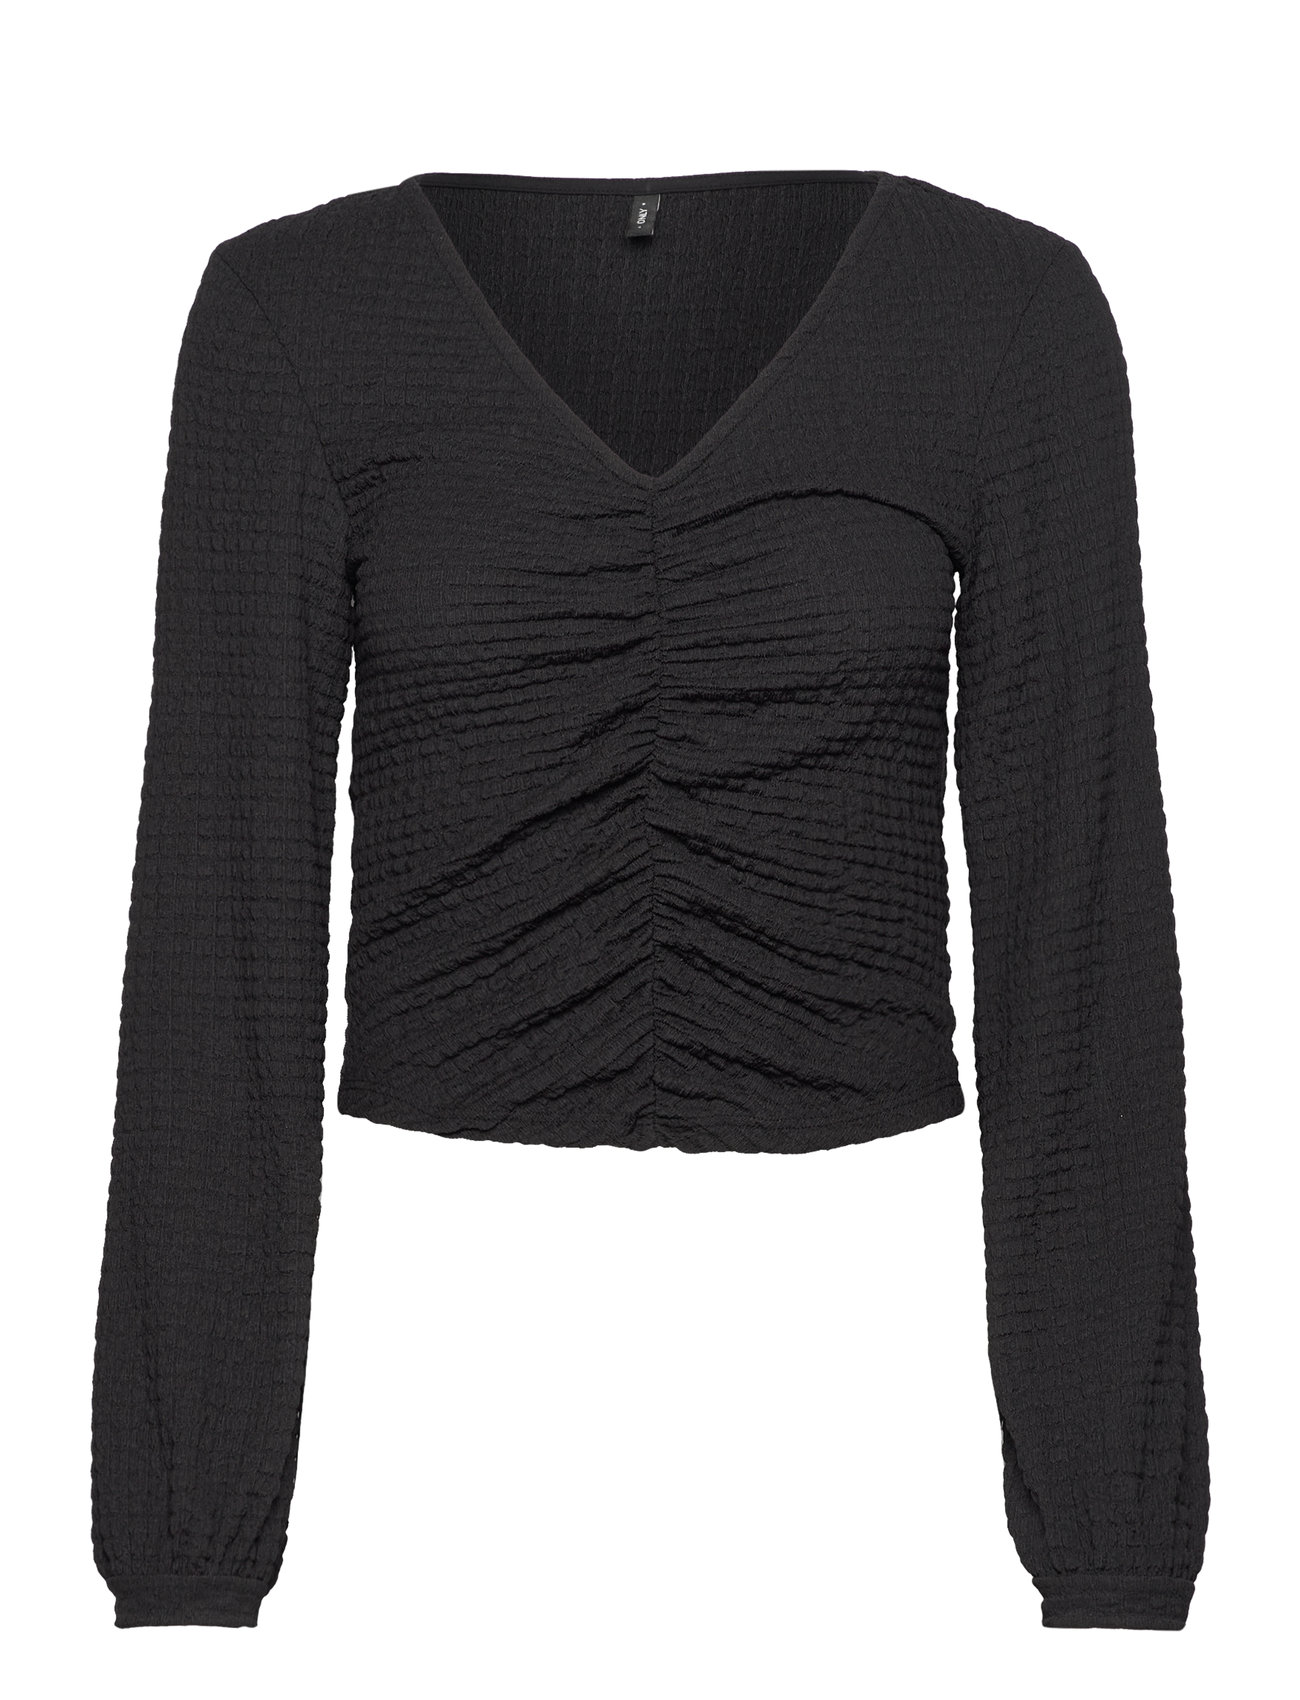 Cc ONLY Onlmai Top L/s - Long-sleeved Jrs tops Ruching